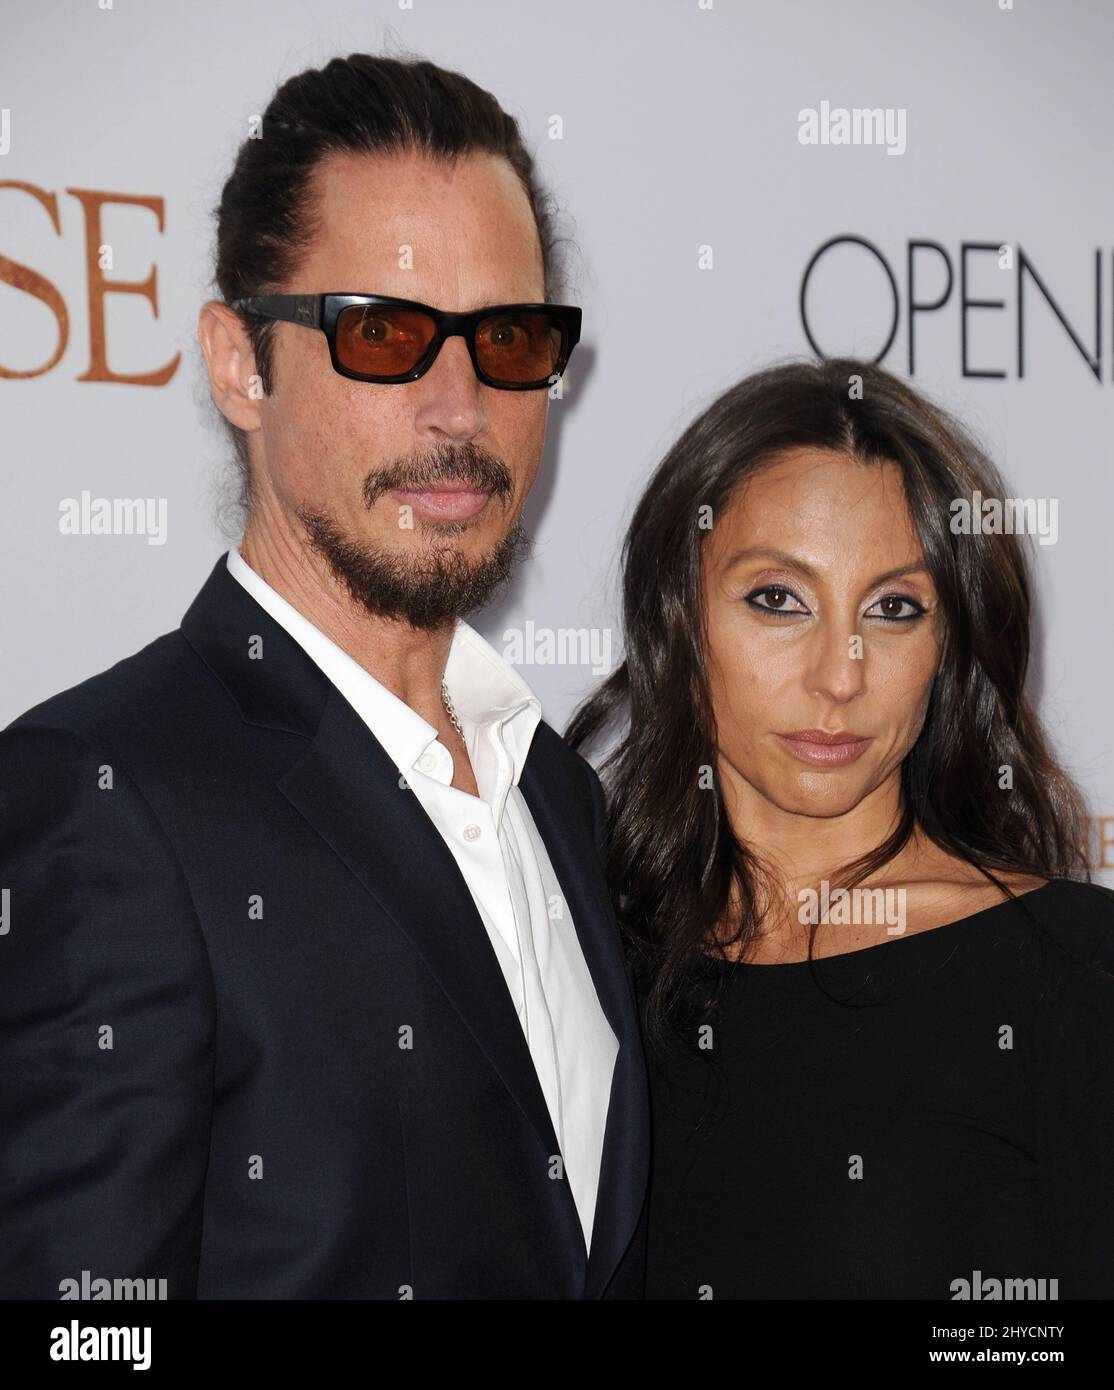 Chris Cornell has died aged 52. Chris Cornell, Vicky Karayiannis attending the premiere of The Promise, held at TCL Chinese Theatre, in Los Angeles, California Stock Photo